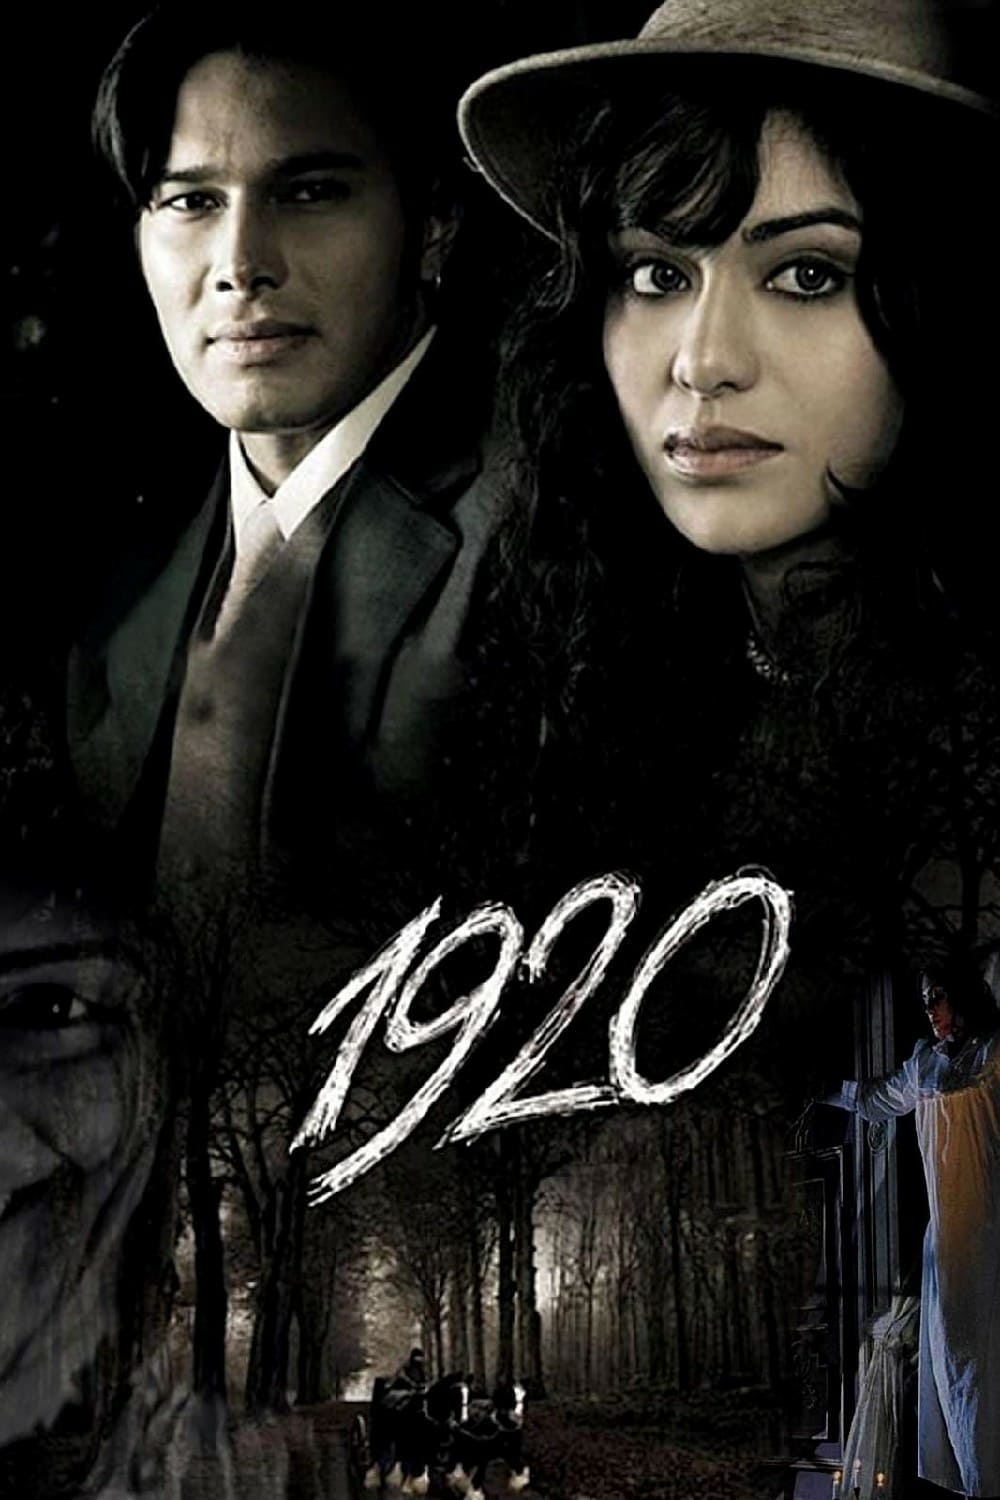 Poster for the movie "1920"